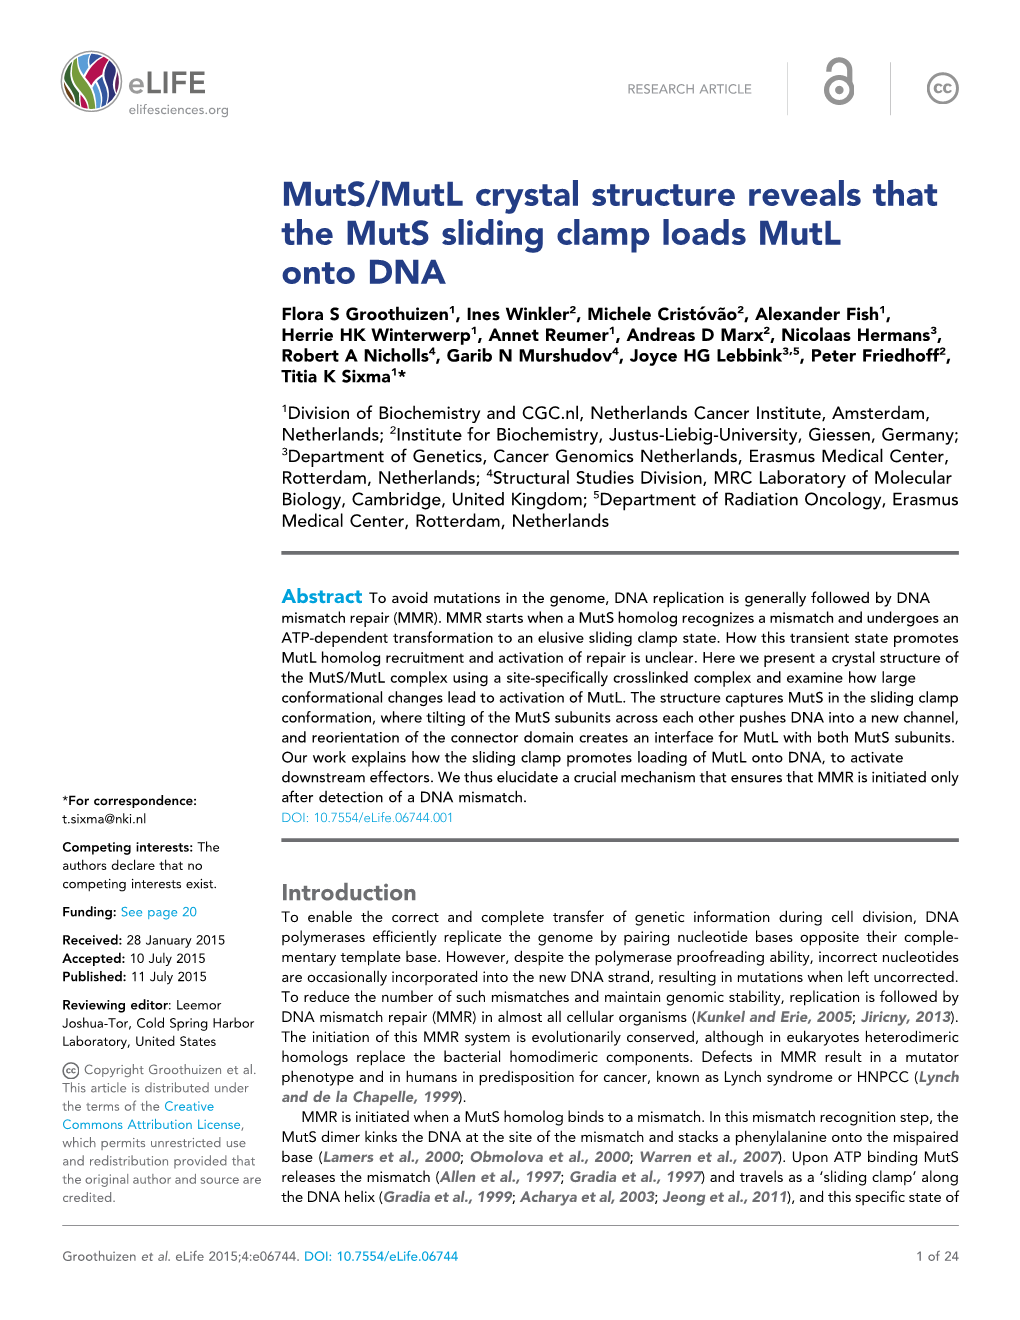 Muts/Mutl Crystal Structure Reveals That the Muts Sliding Clamp Loads